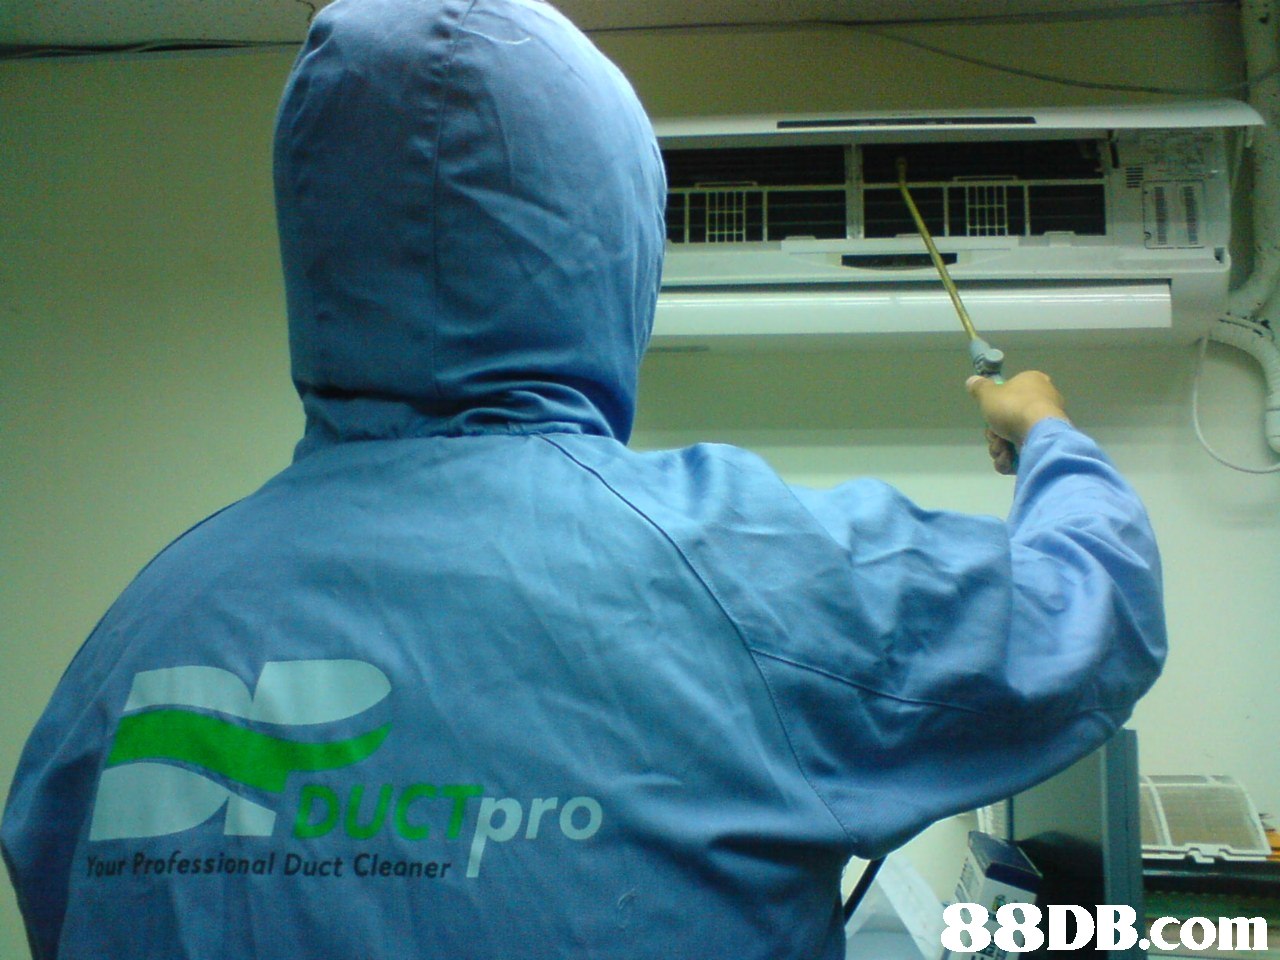 OLpro Your Professional Duct Cleaner   Outerwear,